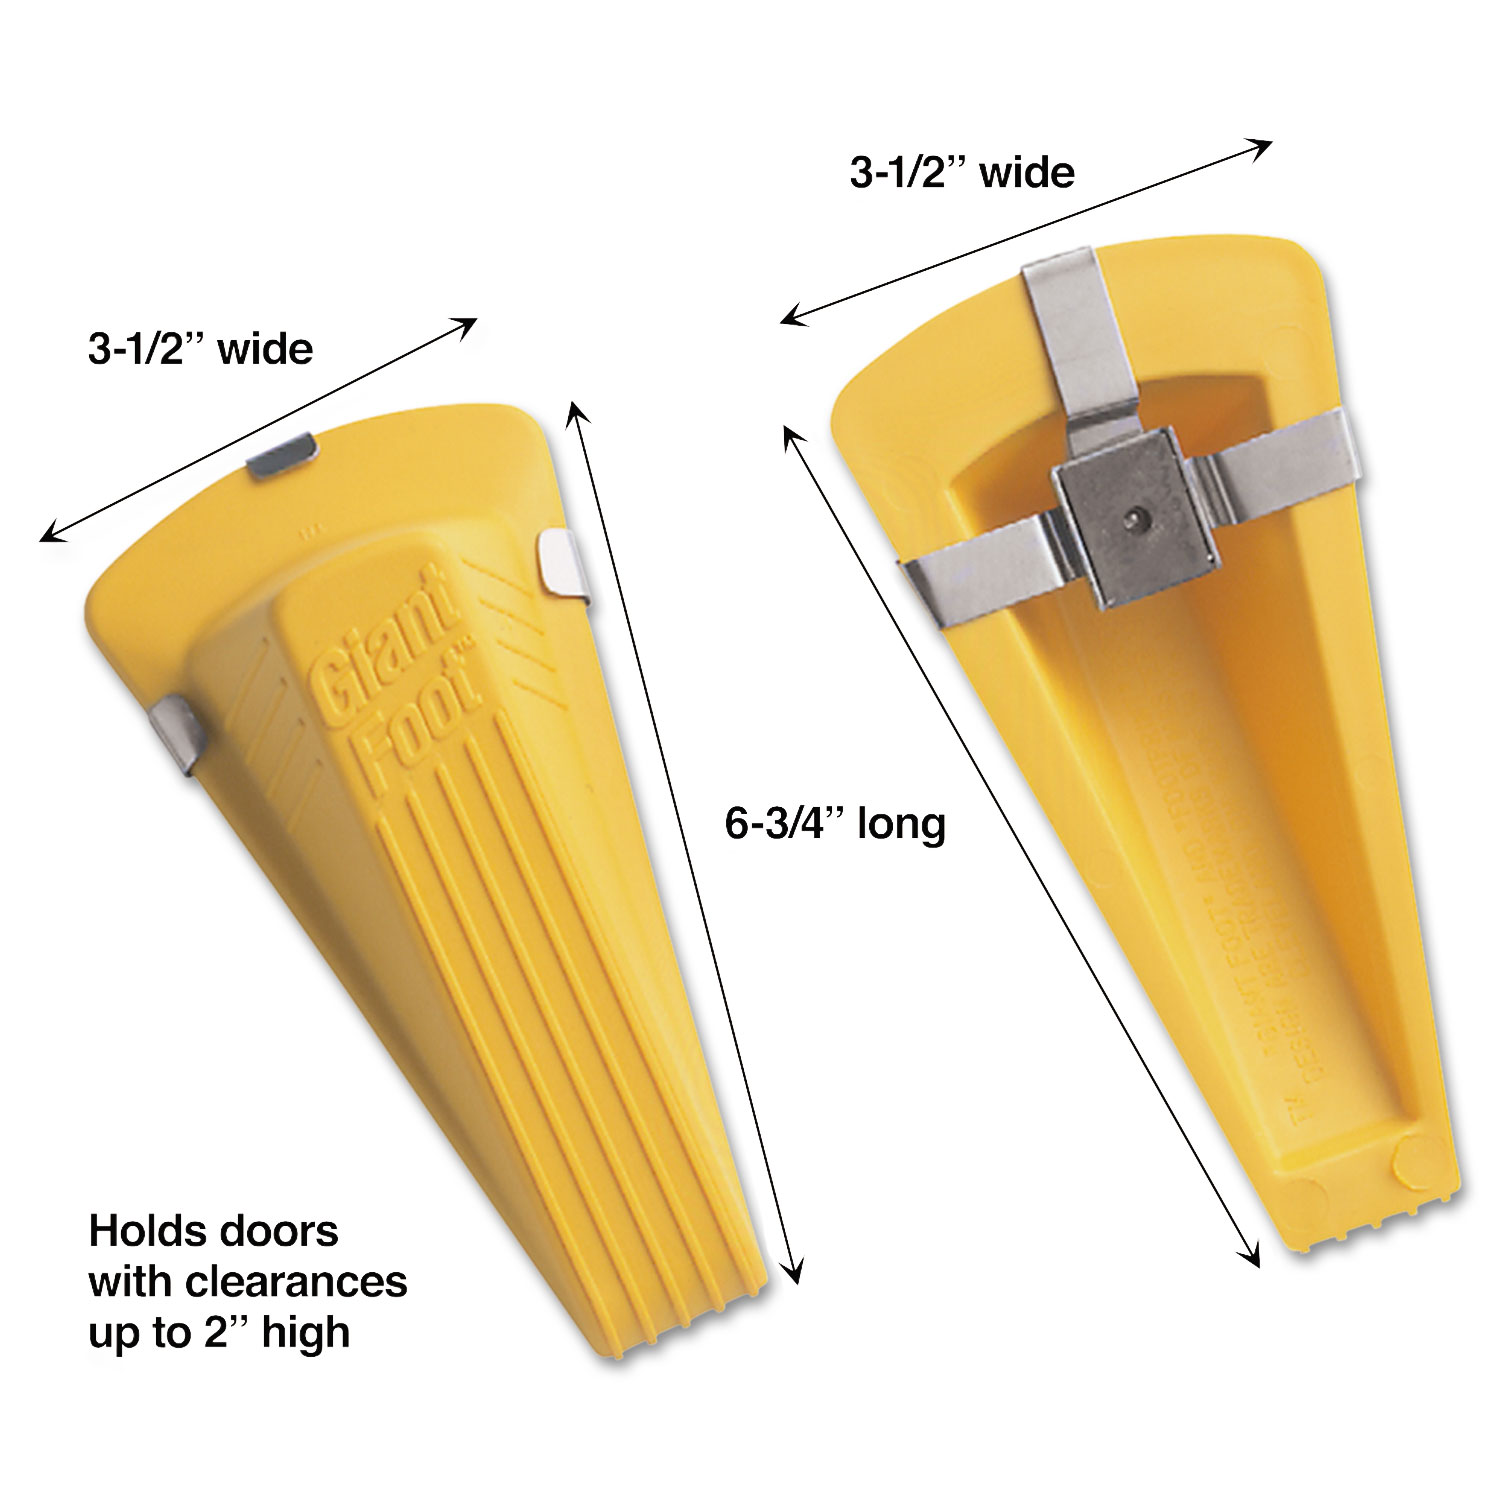  Master Caster 00967 Giant Foot Magnetic Doorstop, No-Slip Rubber Wedge, 3.5w x 6.75d x 2h, Yellow (MAS00967) 